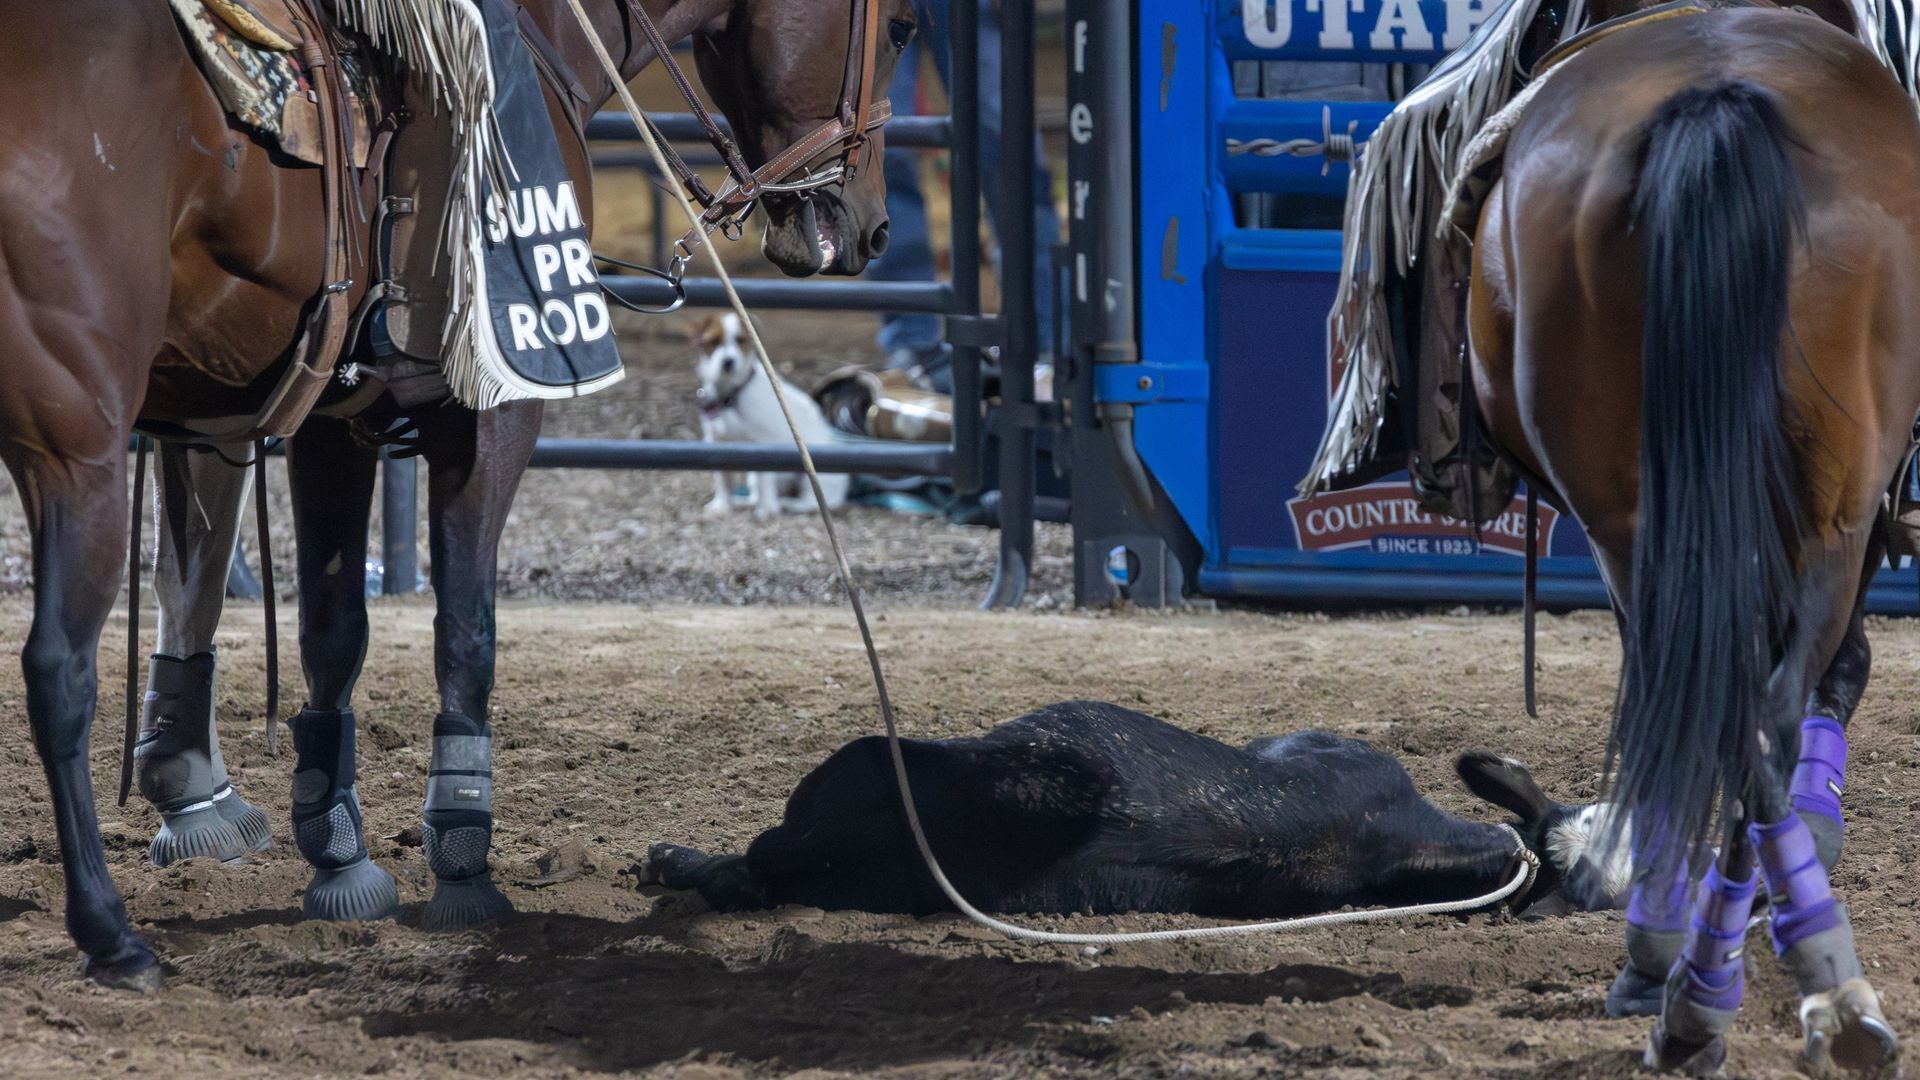 A roped calf lies on the dirt in a rodeo ring while two horses and a dog look on.